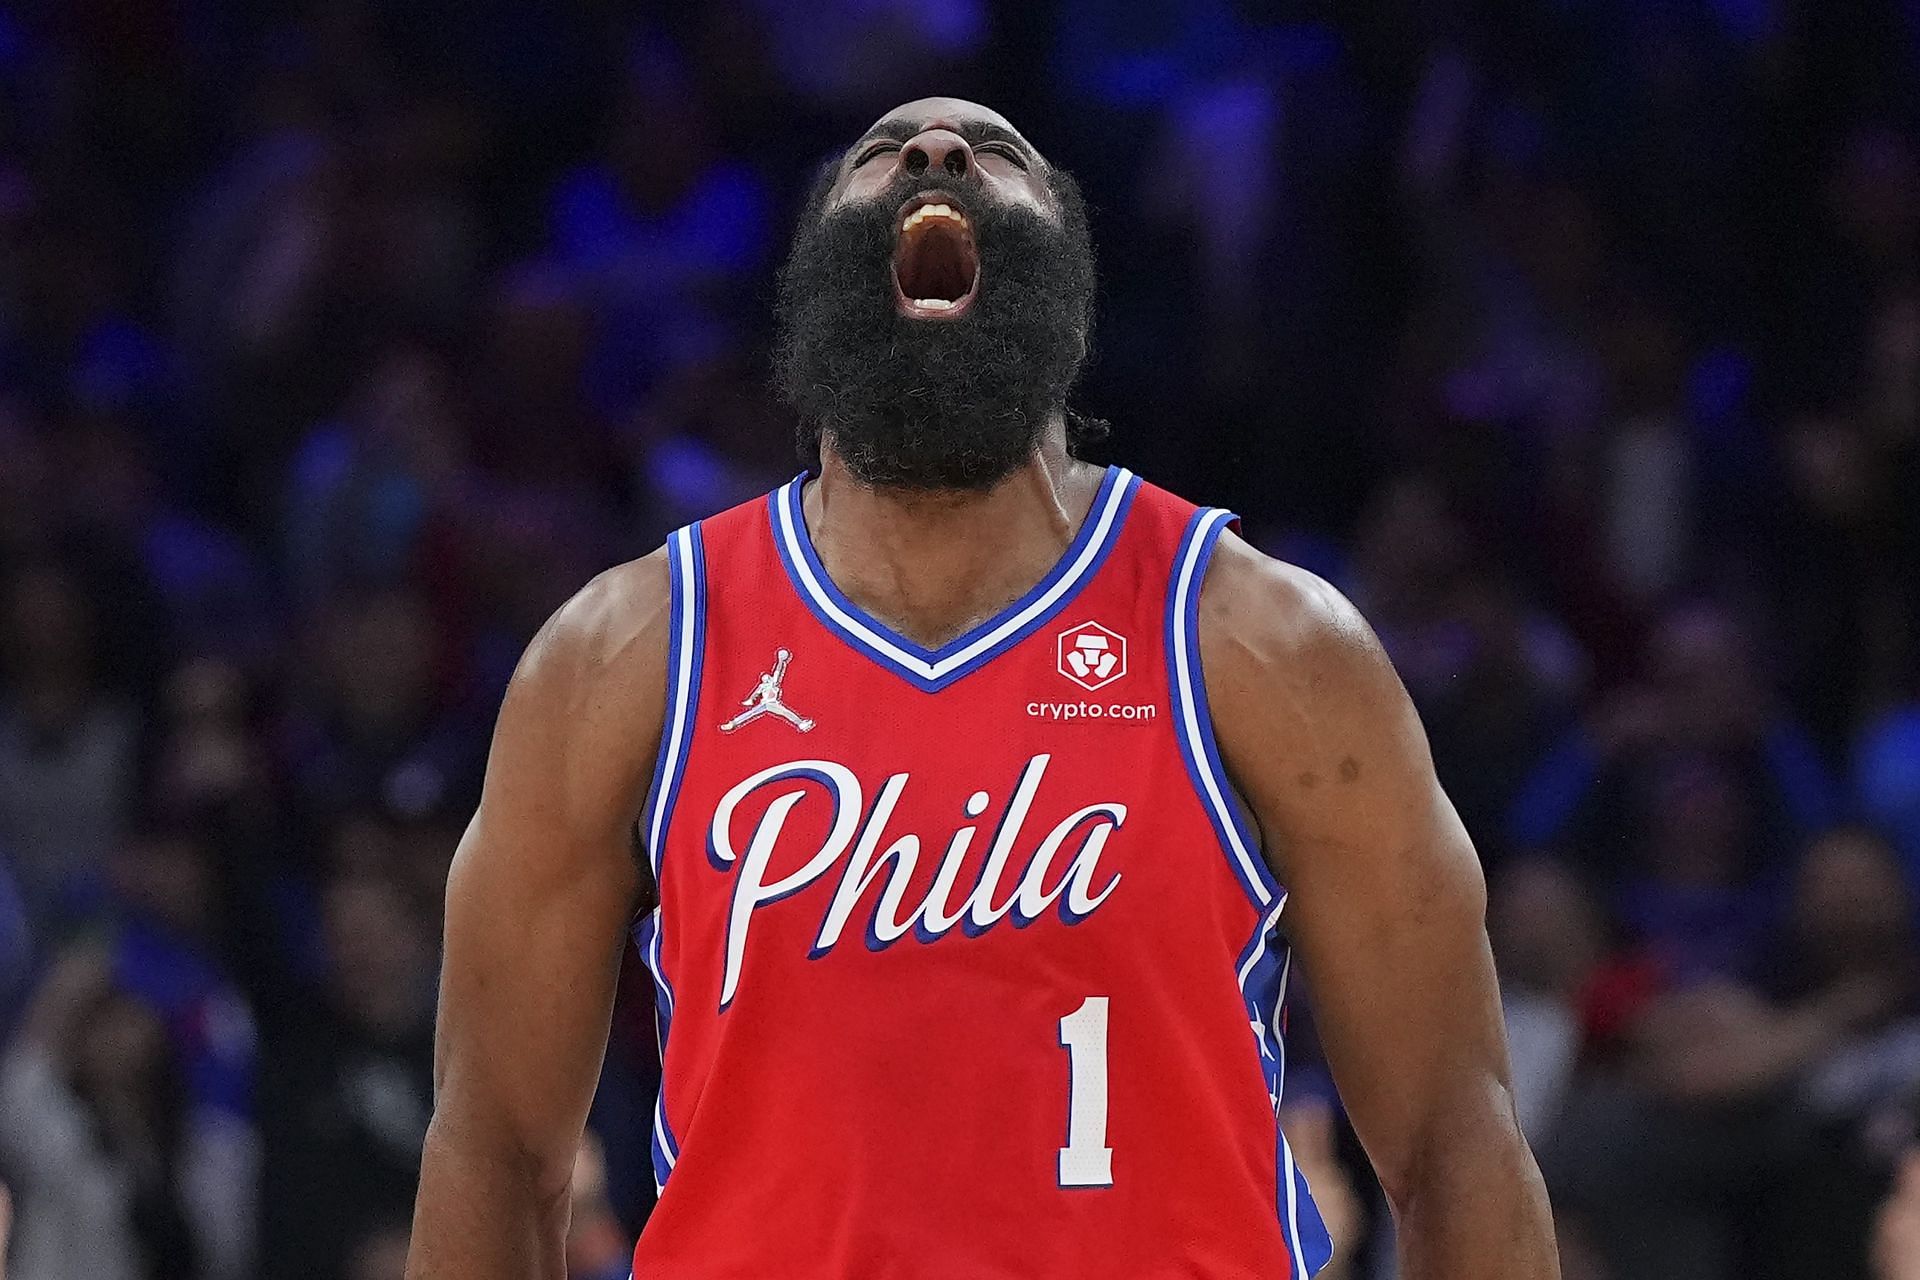 James Harden reacts to a play during the 2021-22 NBA season